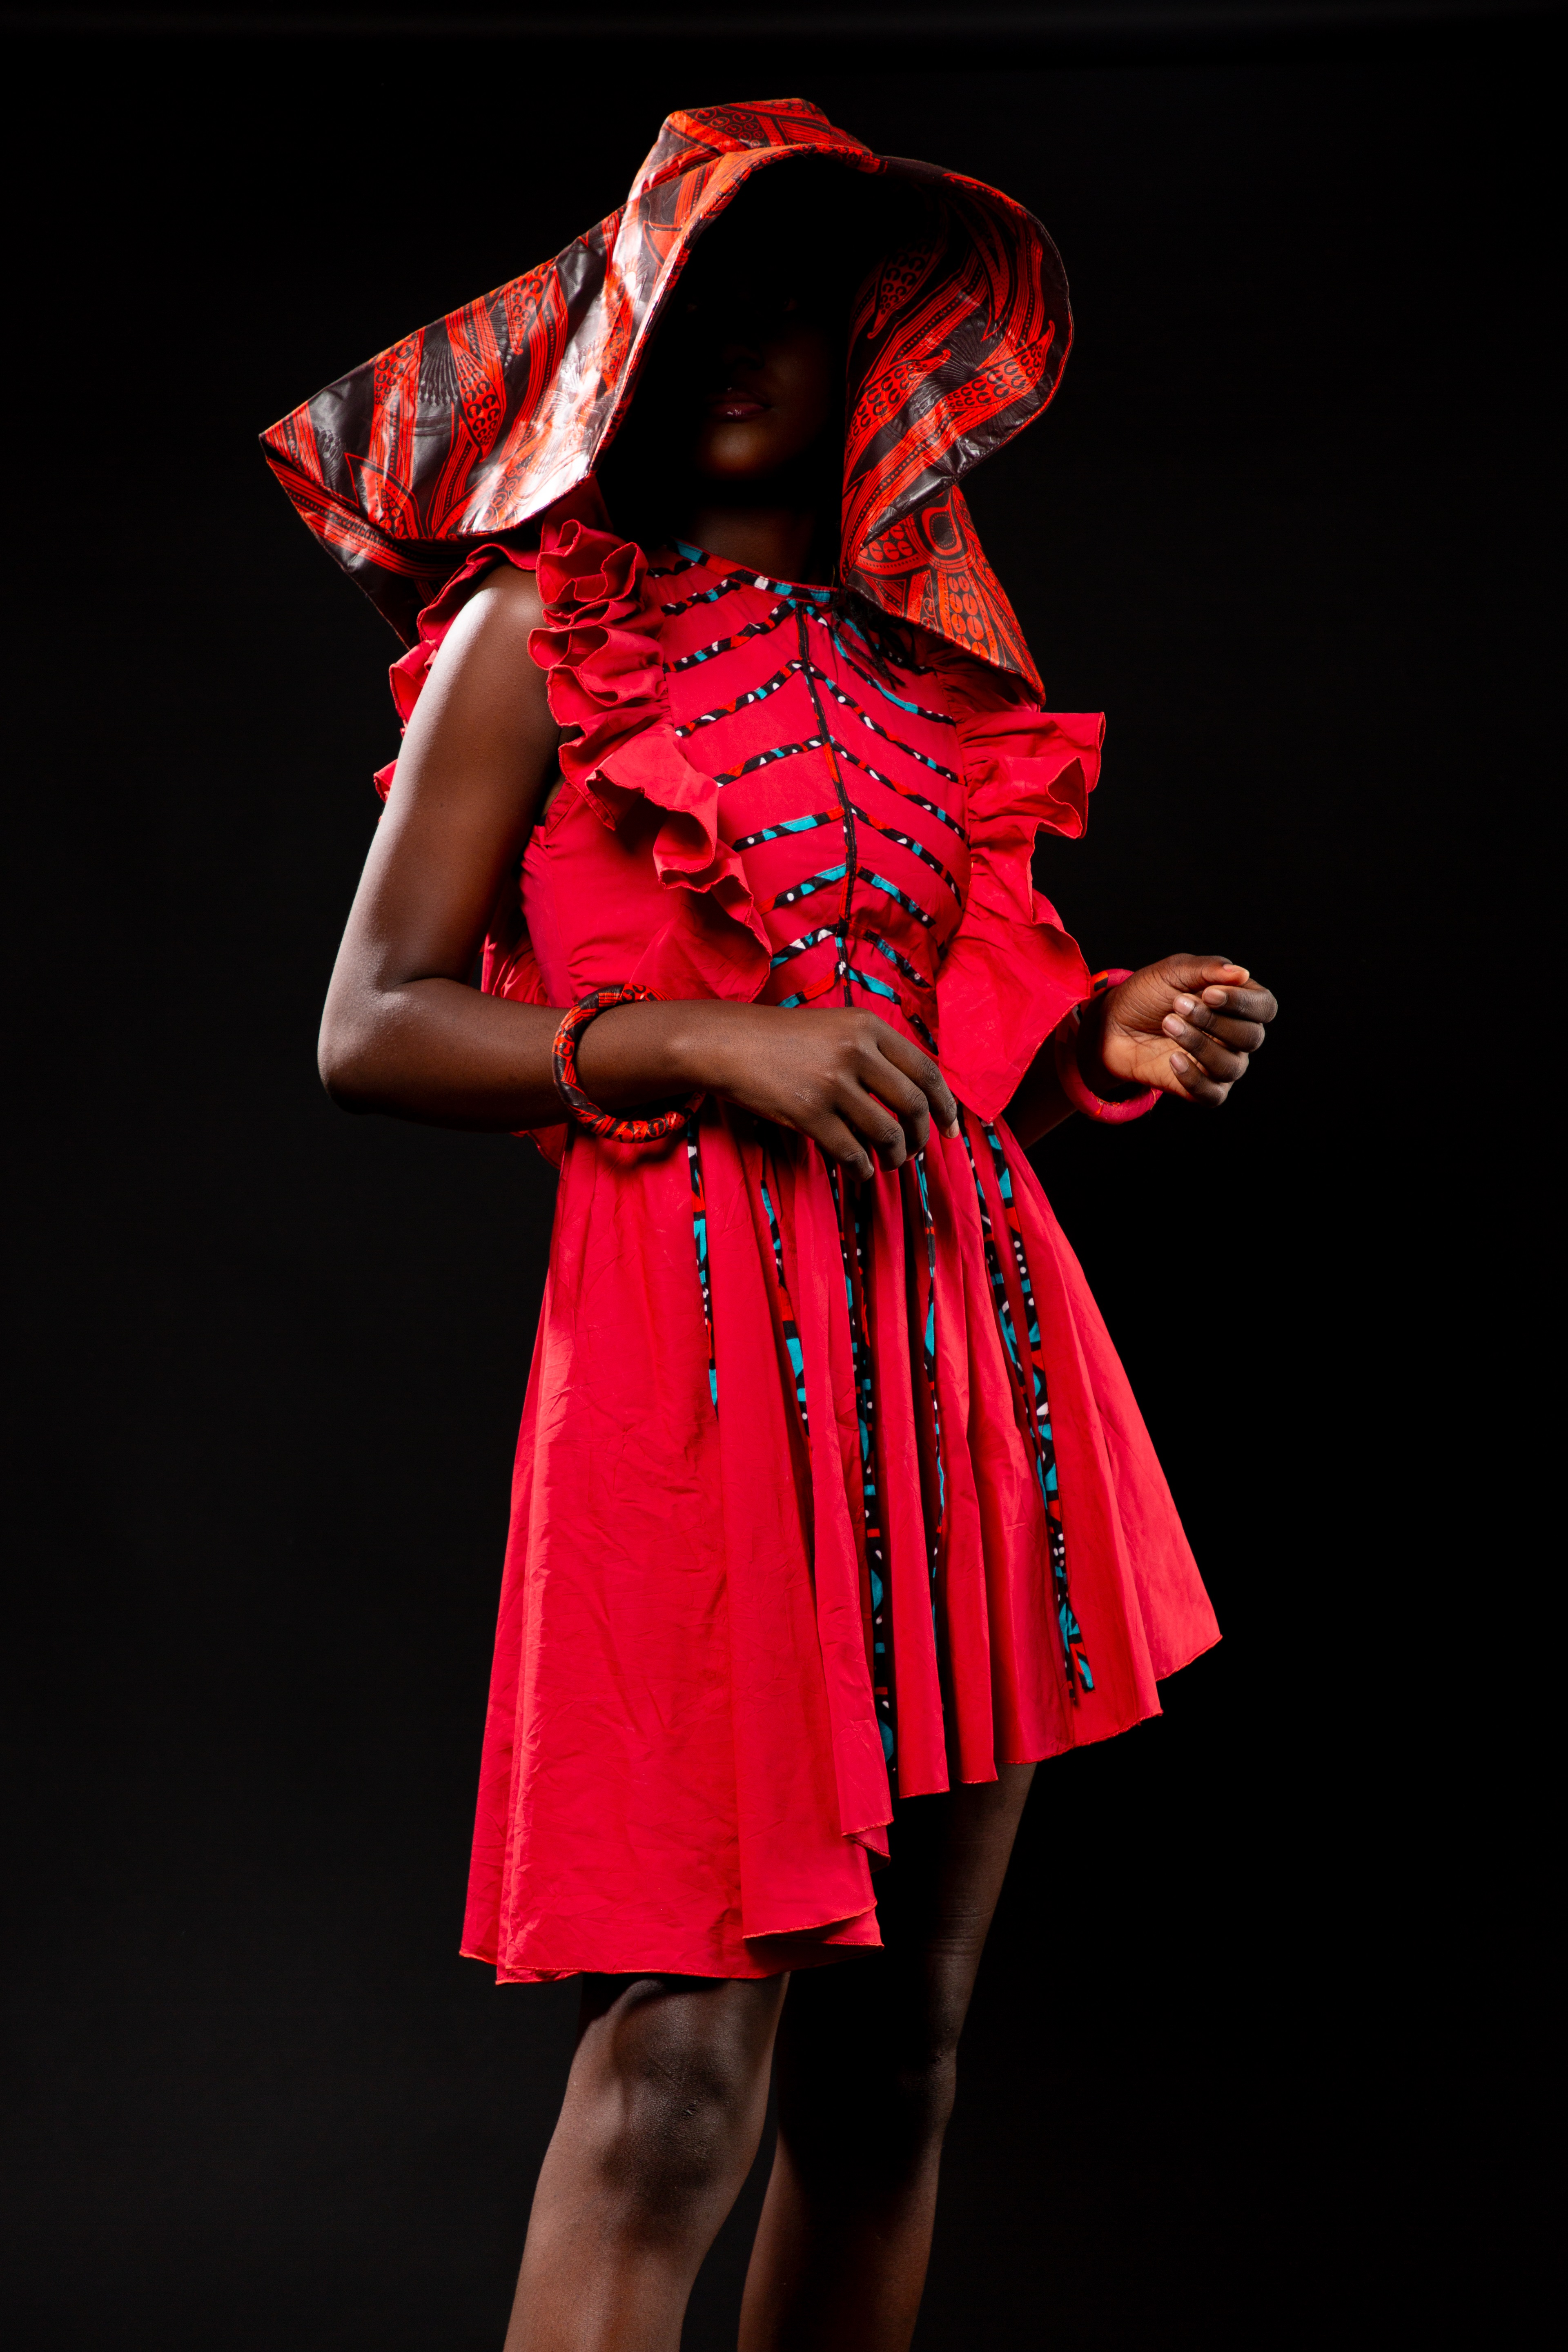 Image 2 of Mambila red dress with red bogolan stripes (Dikalo)